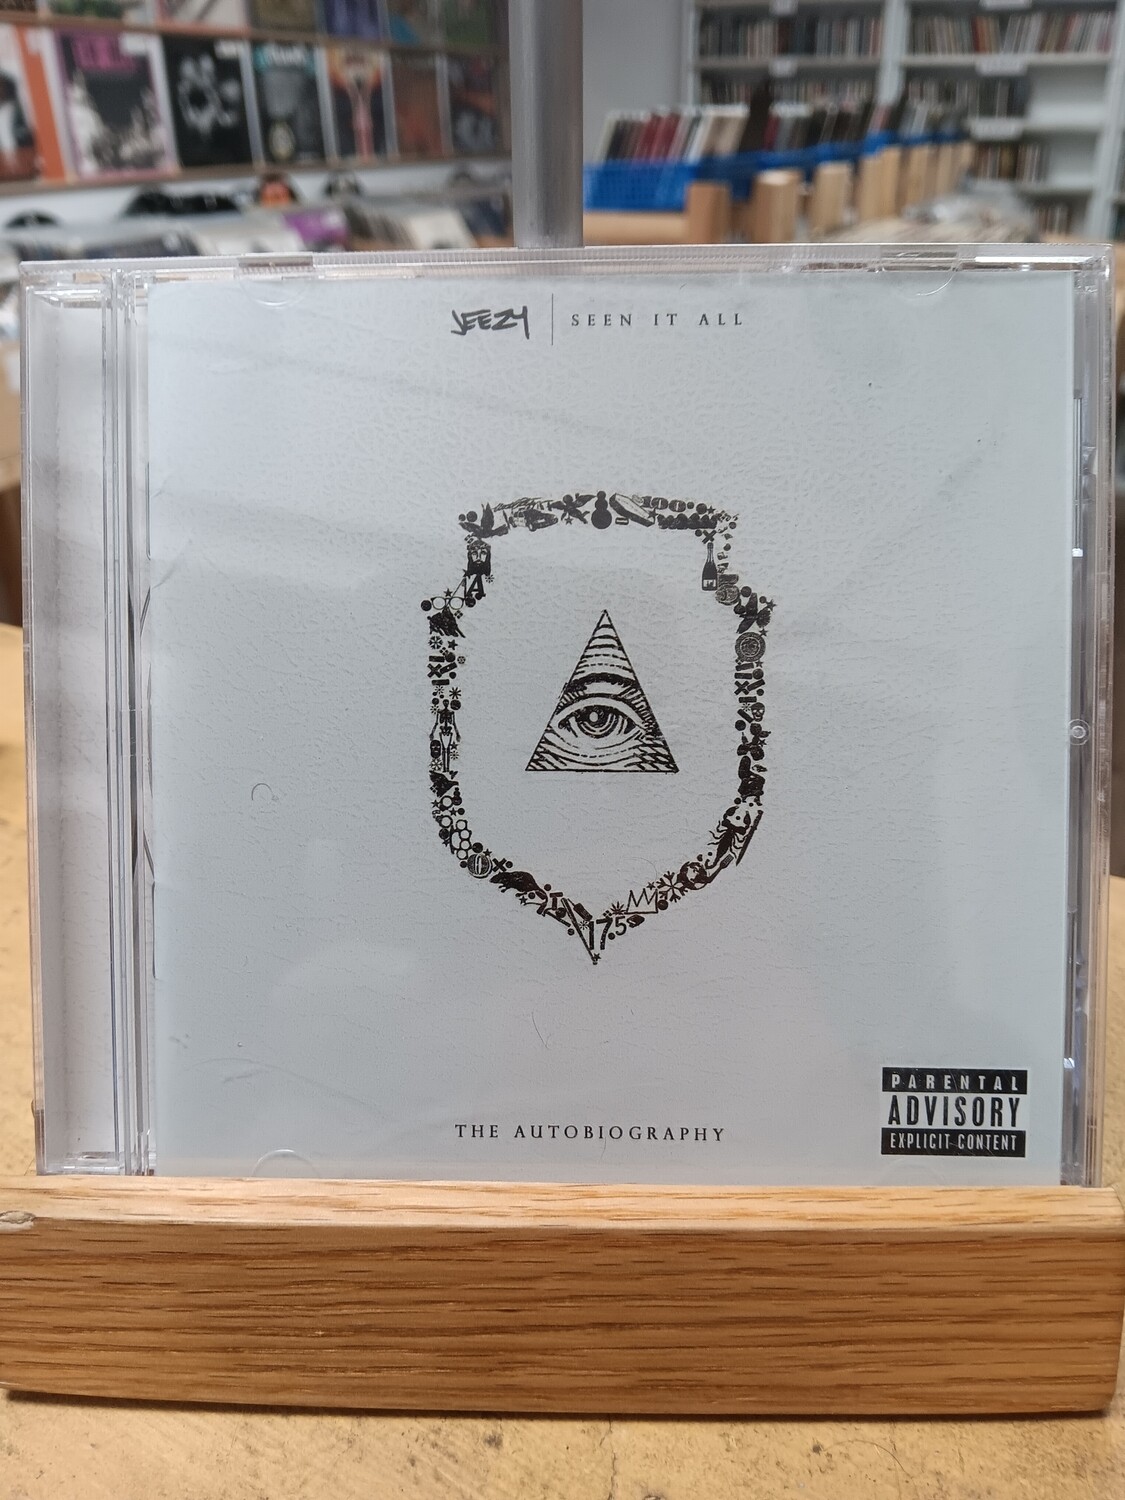 JEEZY - The autobiography (CD)